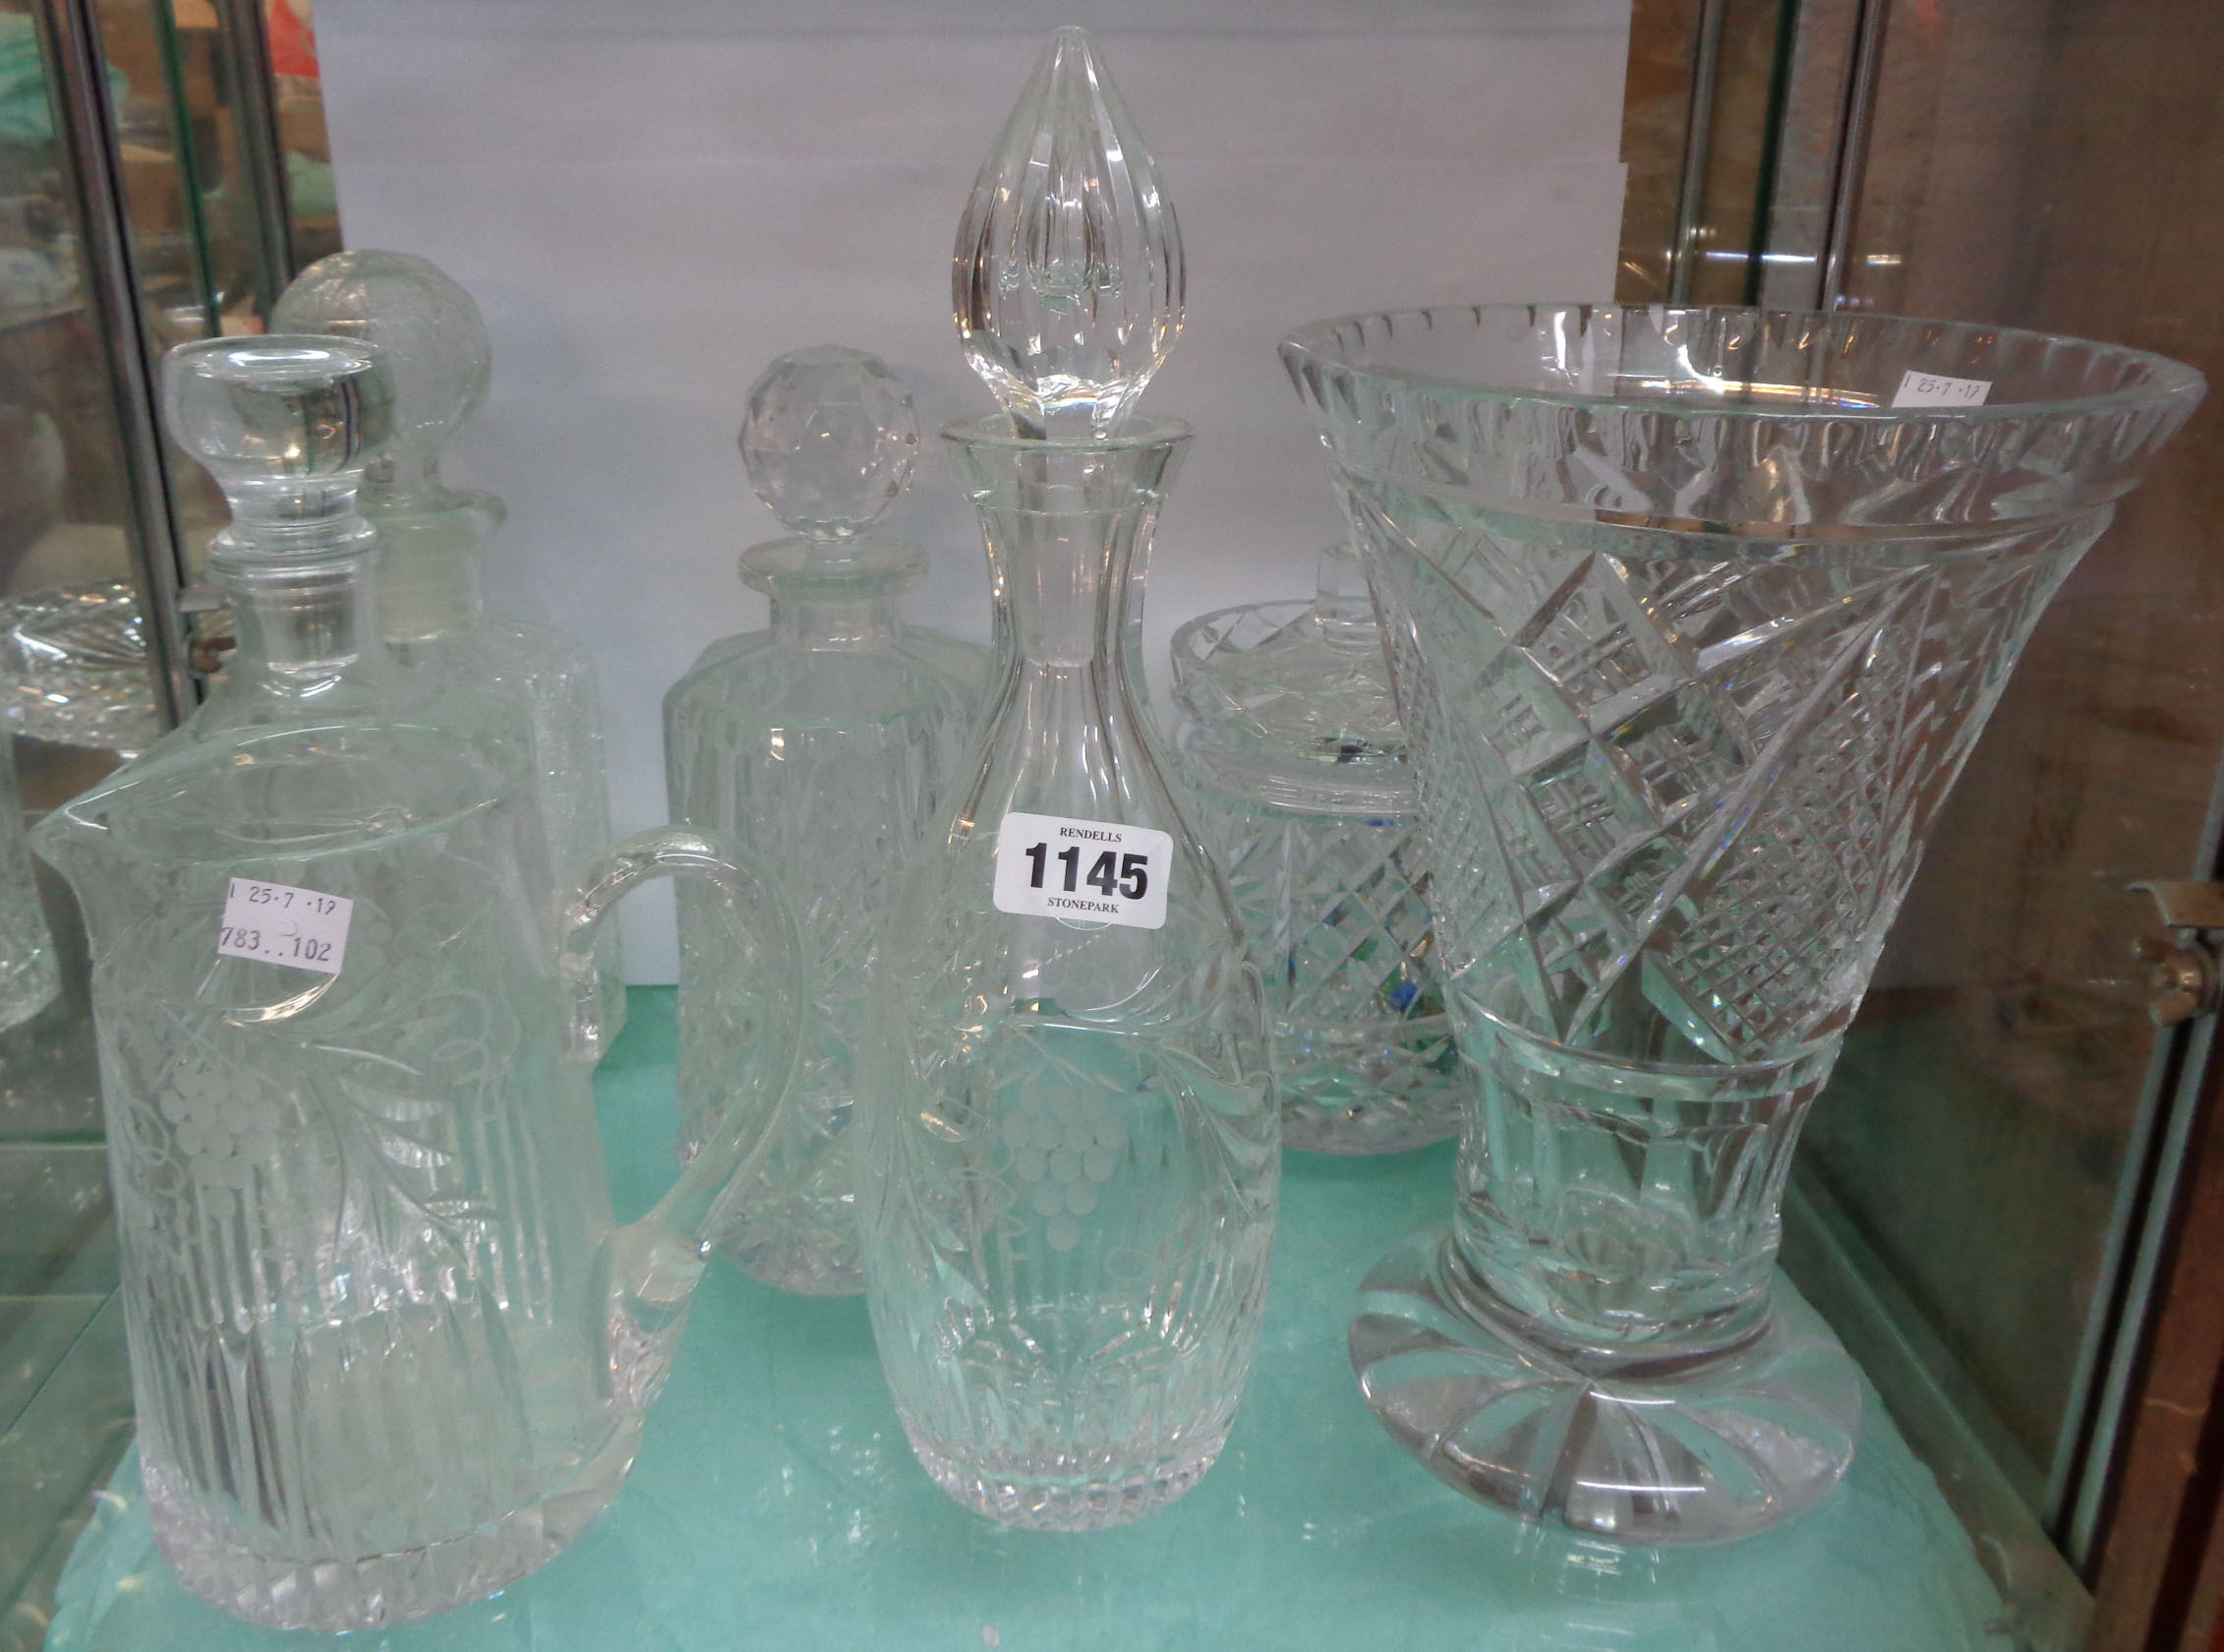 A collection of cut glass vases, decanters, etc.